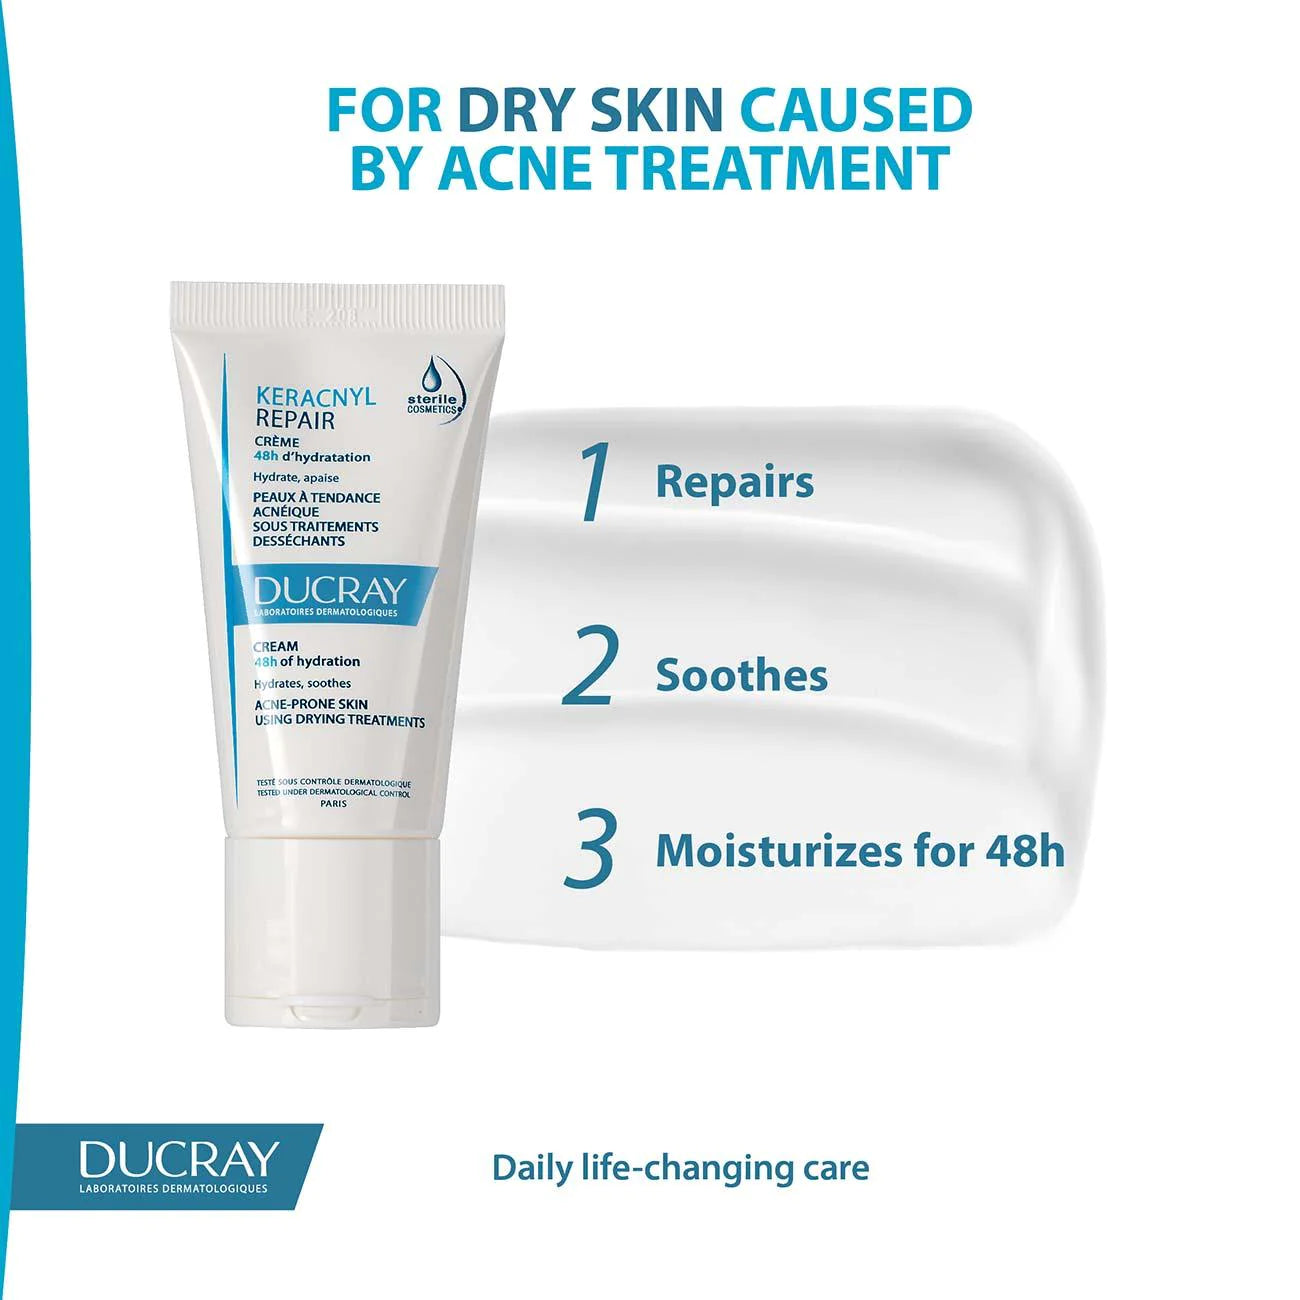 DUCRAY Keracnyl Repair Cream 48H of Hydration - Acne-Prone Skin Using Drying Treatments